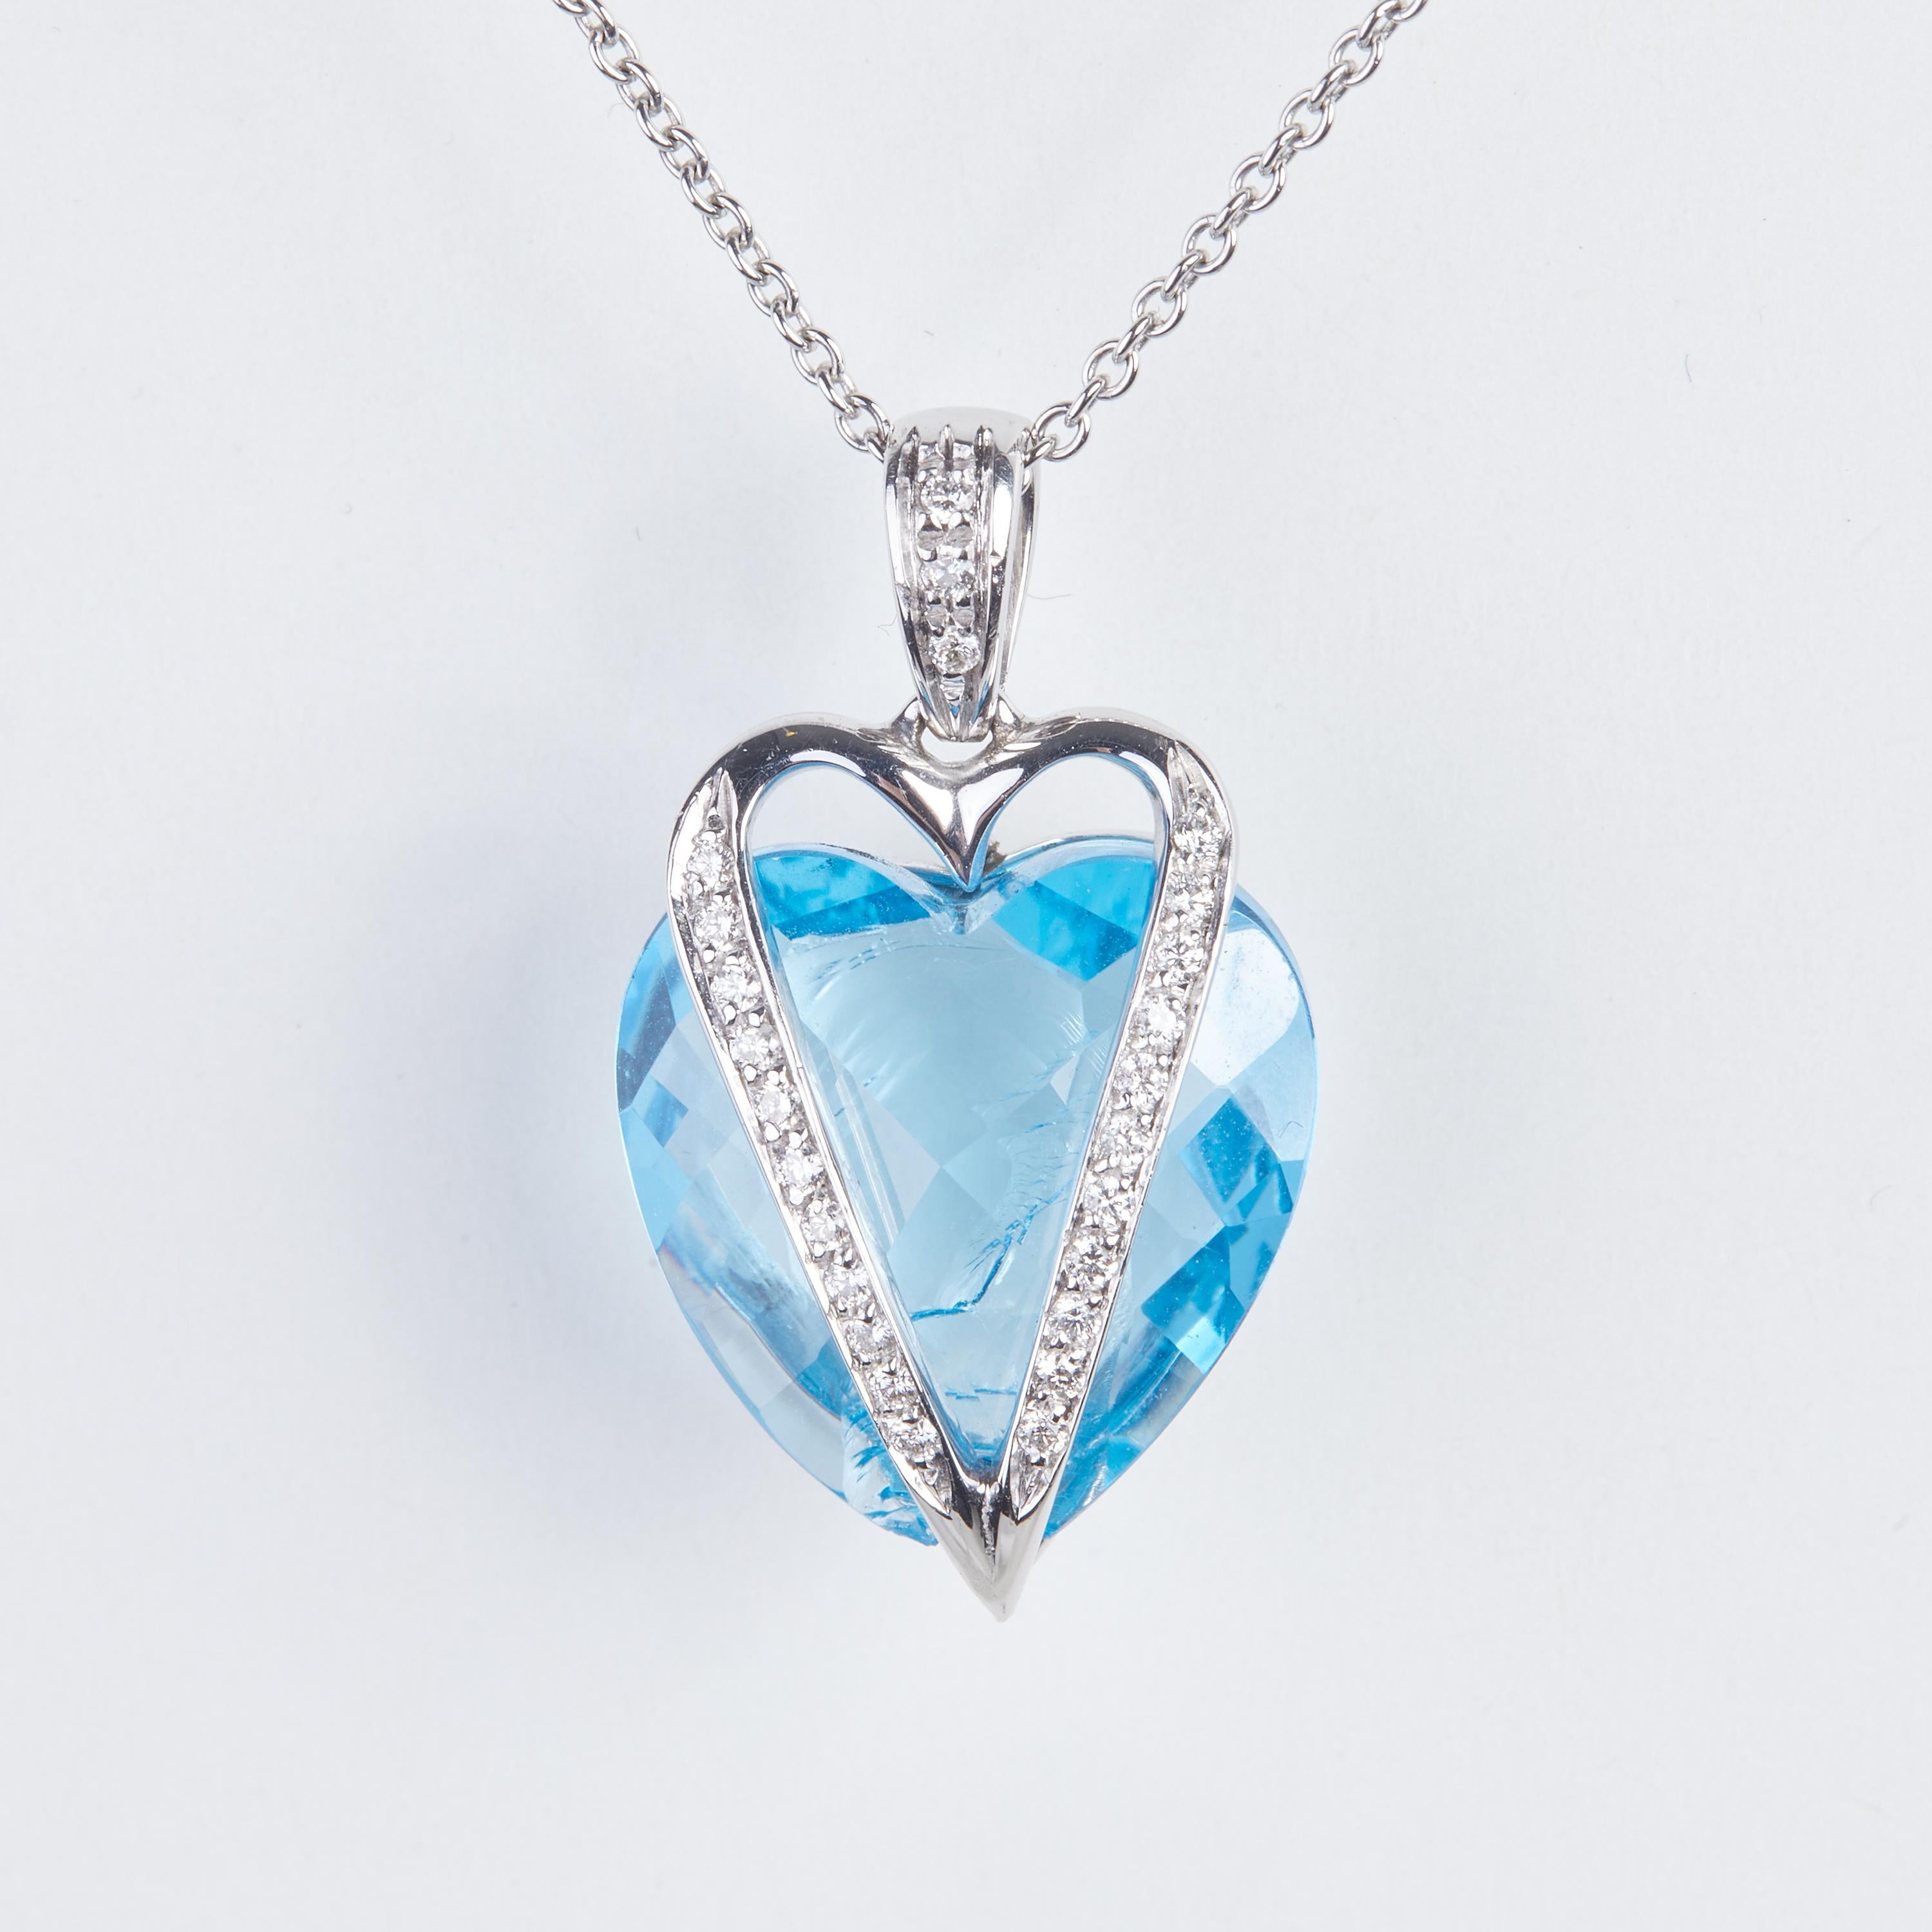 18 Karat White Gold  Diamonds  and Topaz Pendant Necklace

25 Diamonds 0.25 ct. G-SI

1 Topaz 17.46 ct




Founded in 1974, Gianni Lazzaro is a family-owned jewelery company based out of Düsseldorf, Germany.
Although rooted in Germany, Gianni